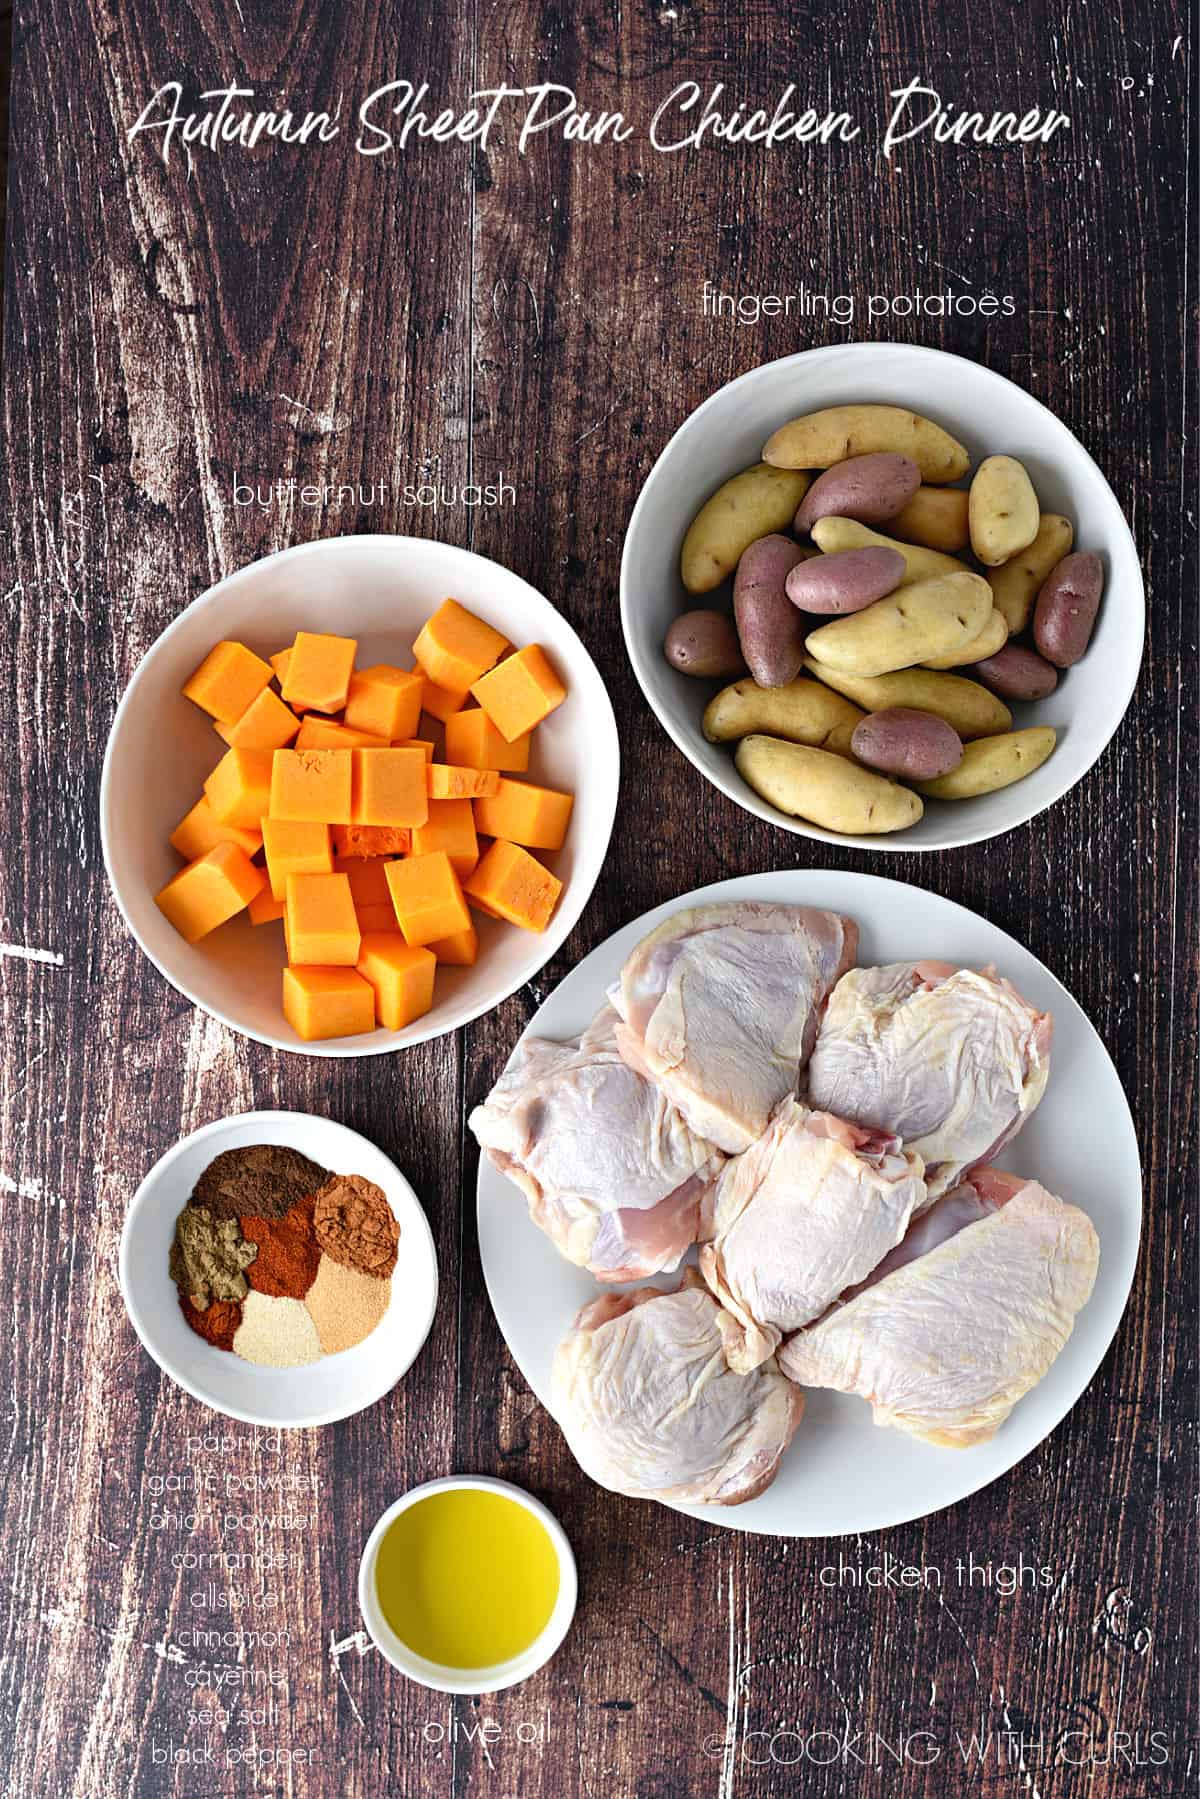 ingredients to make autumn sheet pan chicken dinner include a bowl of fingerling potatoes, a blow of butternut squash cubes, a bowl of spices, bowl of olive oil and a plate with six chicken thighs. 